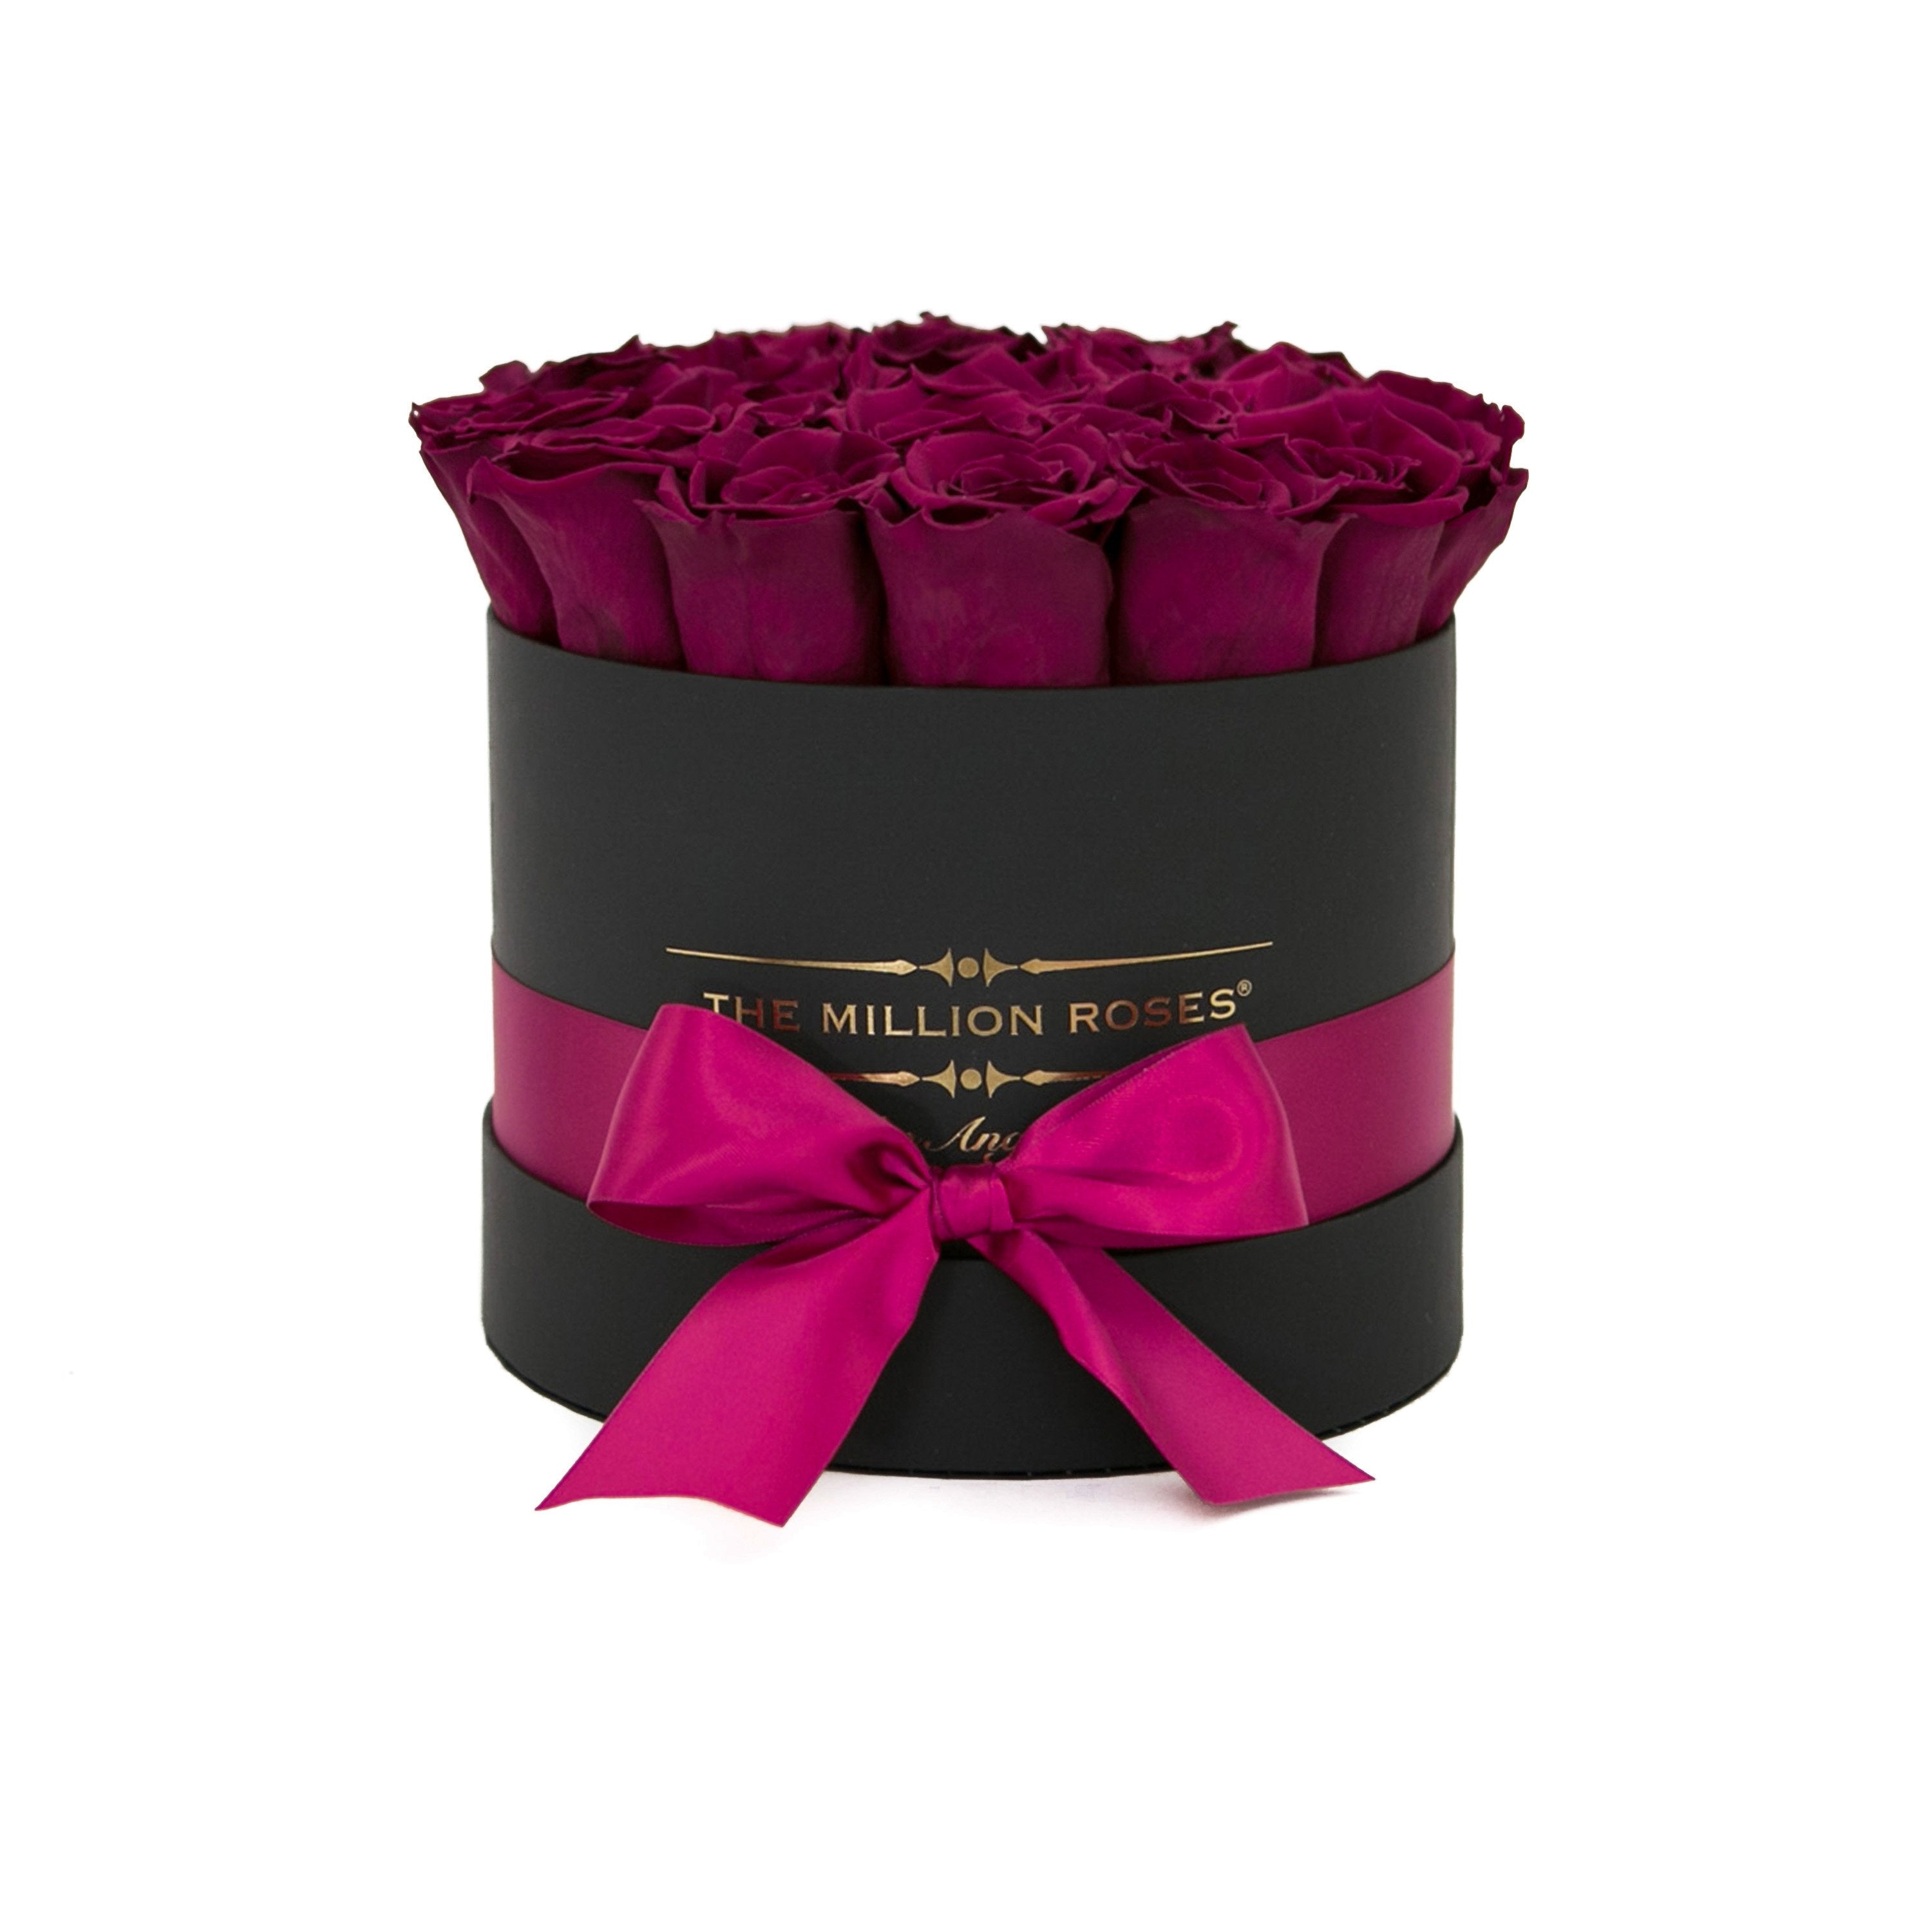 classic round box - black - burgundy roses red eternity roses - the million roses